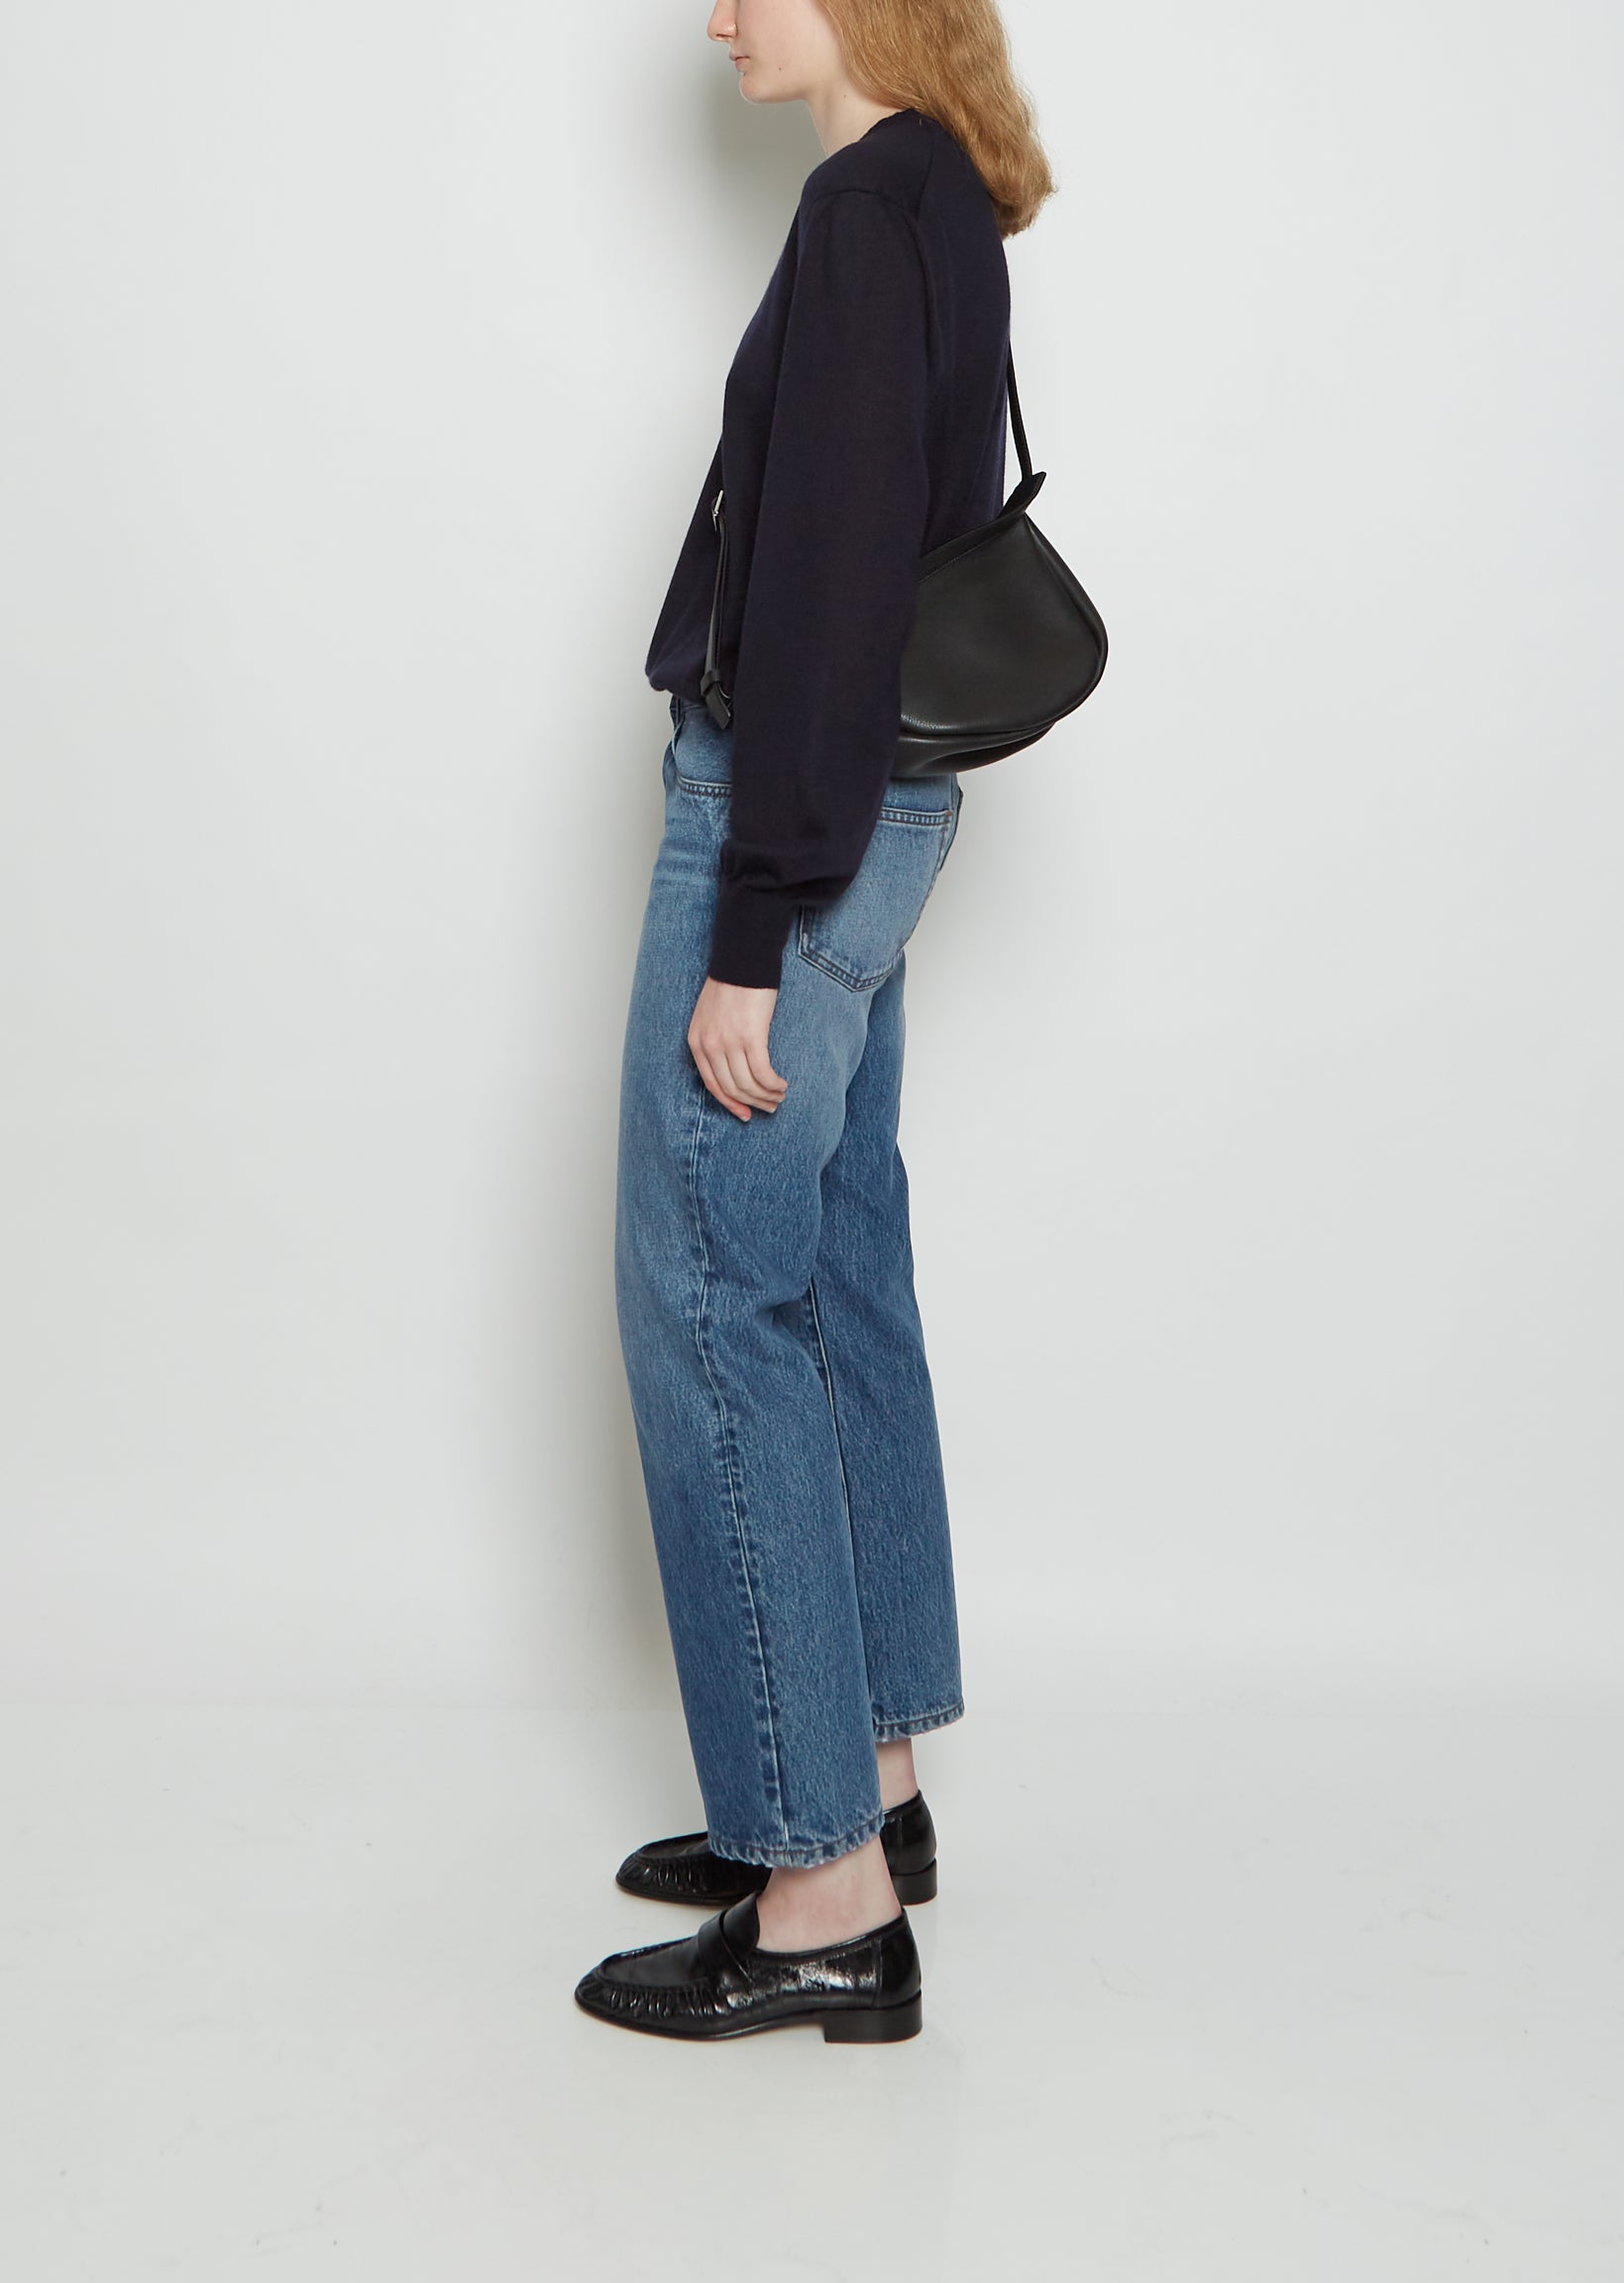 The Row Slouchy Banana Leather Cross Body Bag in Black